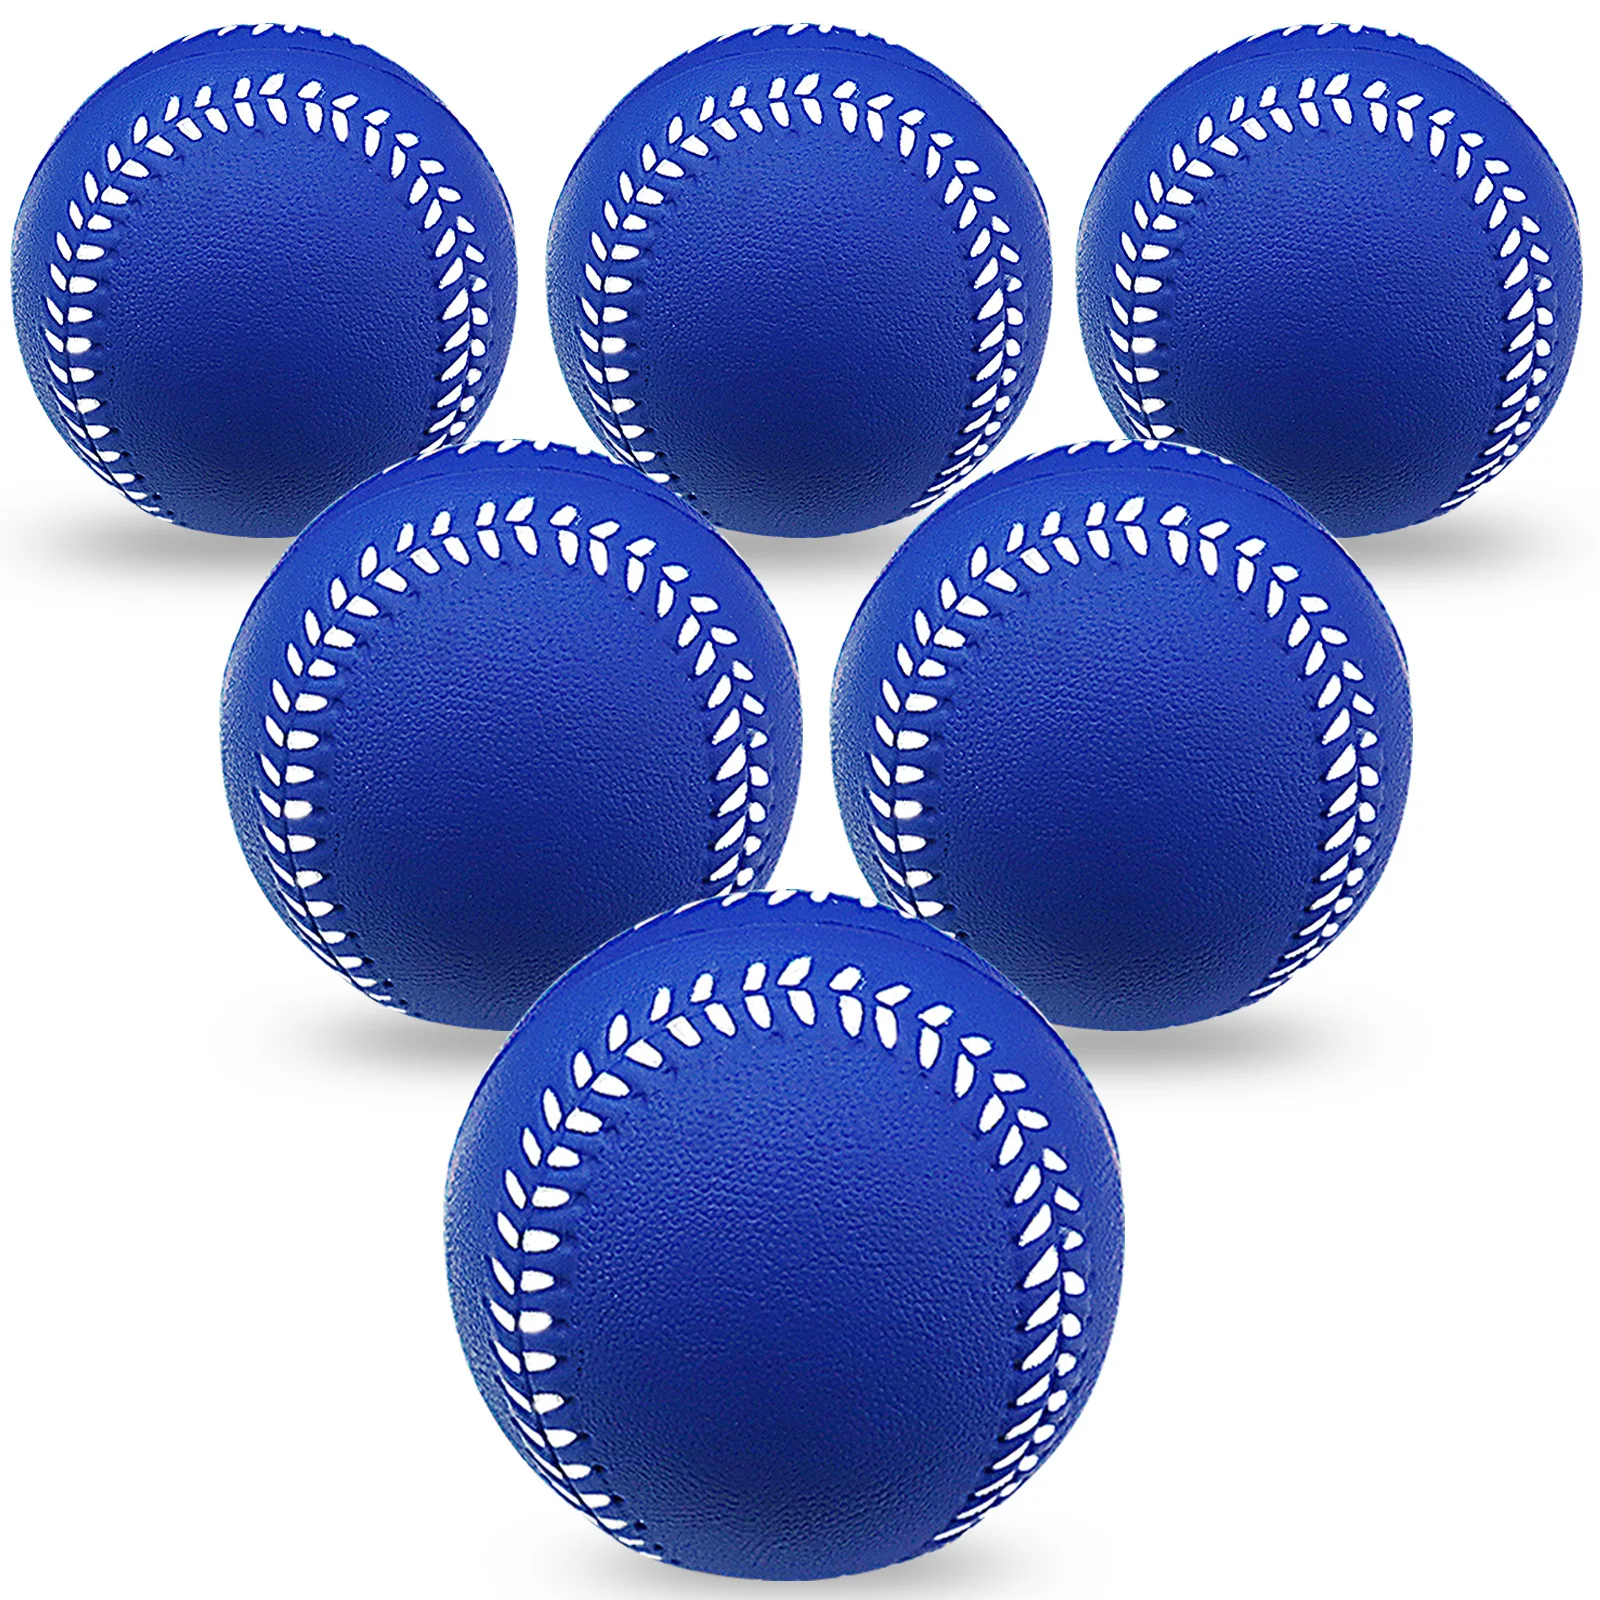 Avesfer Practice Foam Softballs 11 inch with Mesh Bag Soft Oversize Foam  Baseballs Safely Training Batting Hitting Ball and Fielding Indoor Outdoor